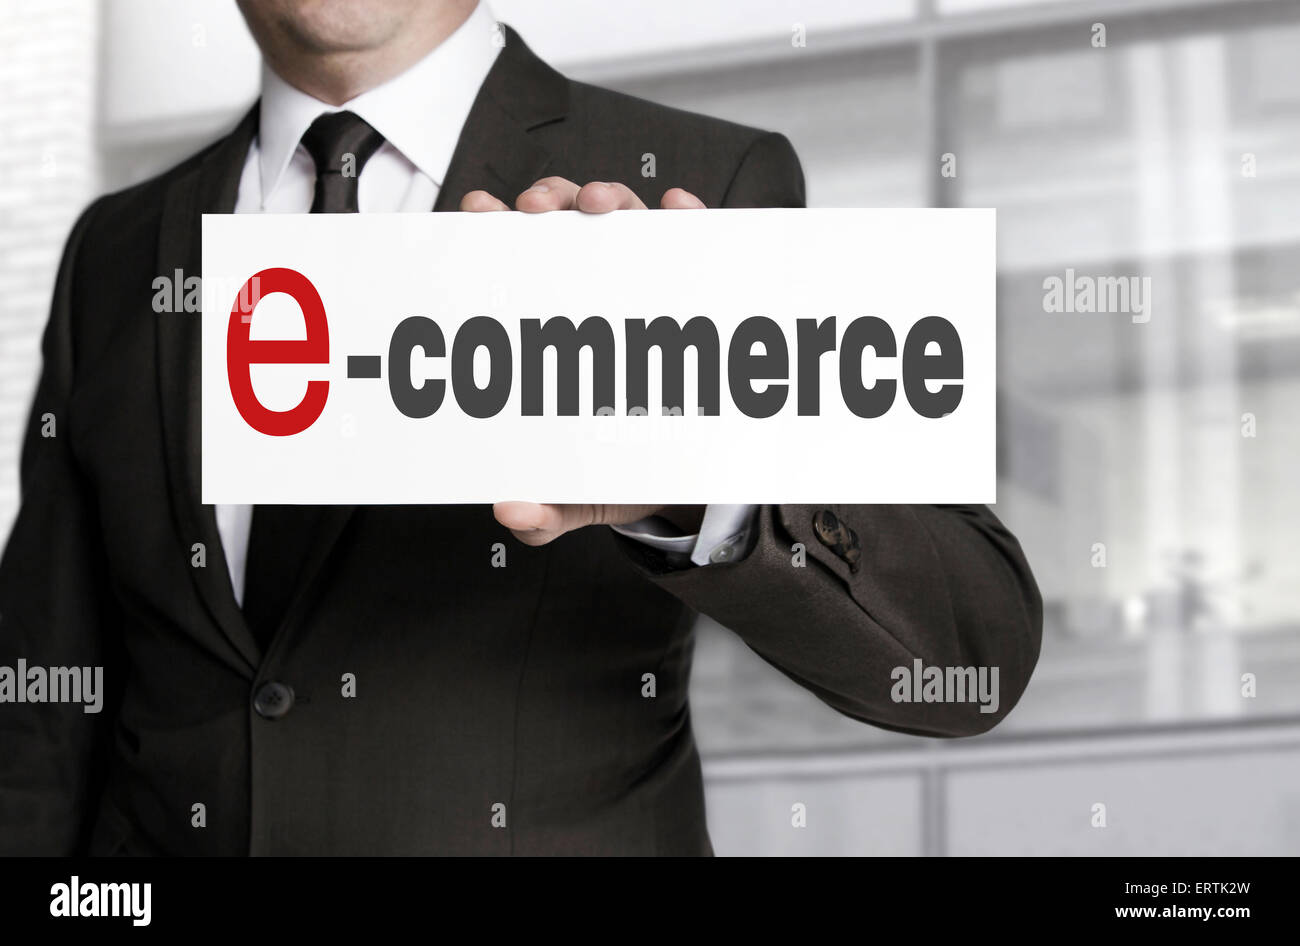 ecommerce sign held by businessman. Stock Photo